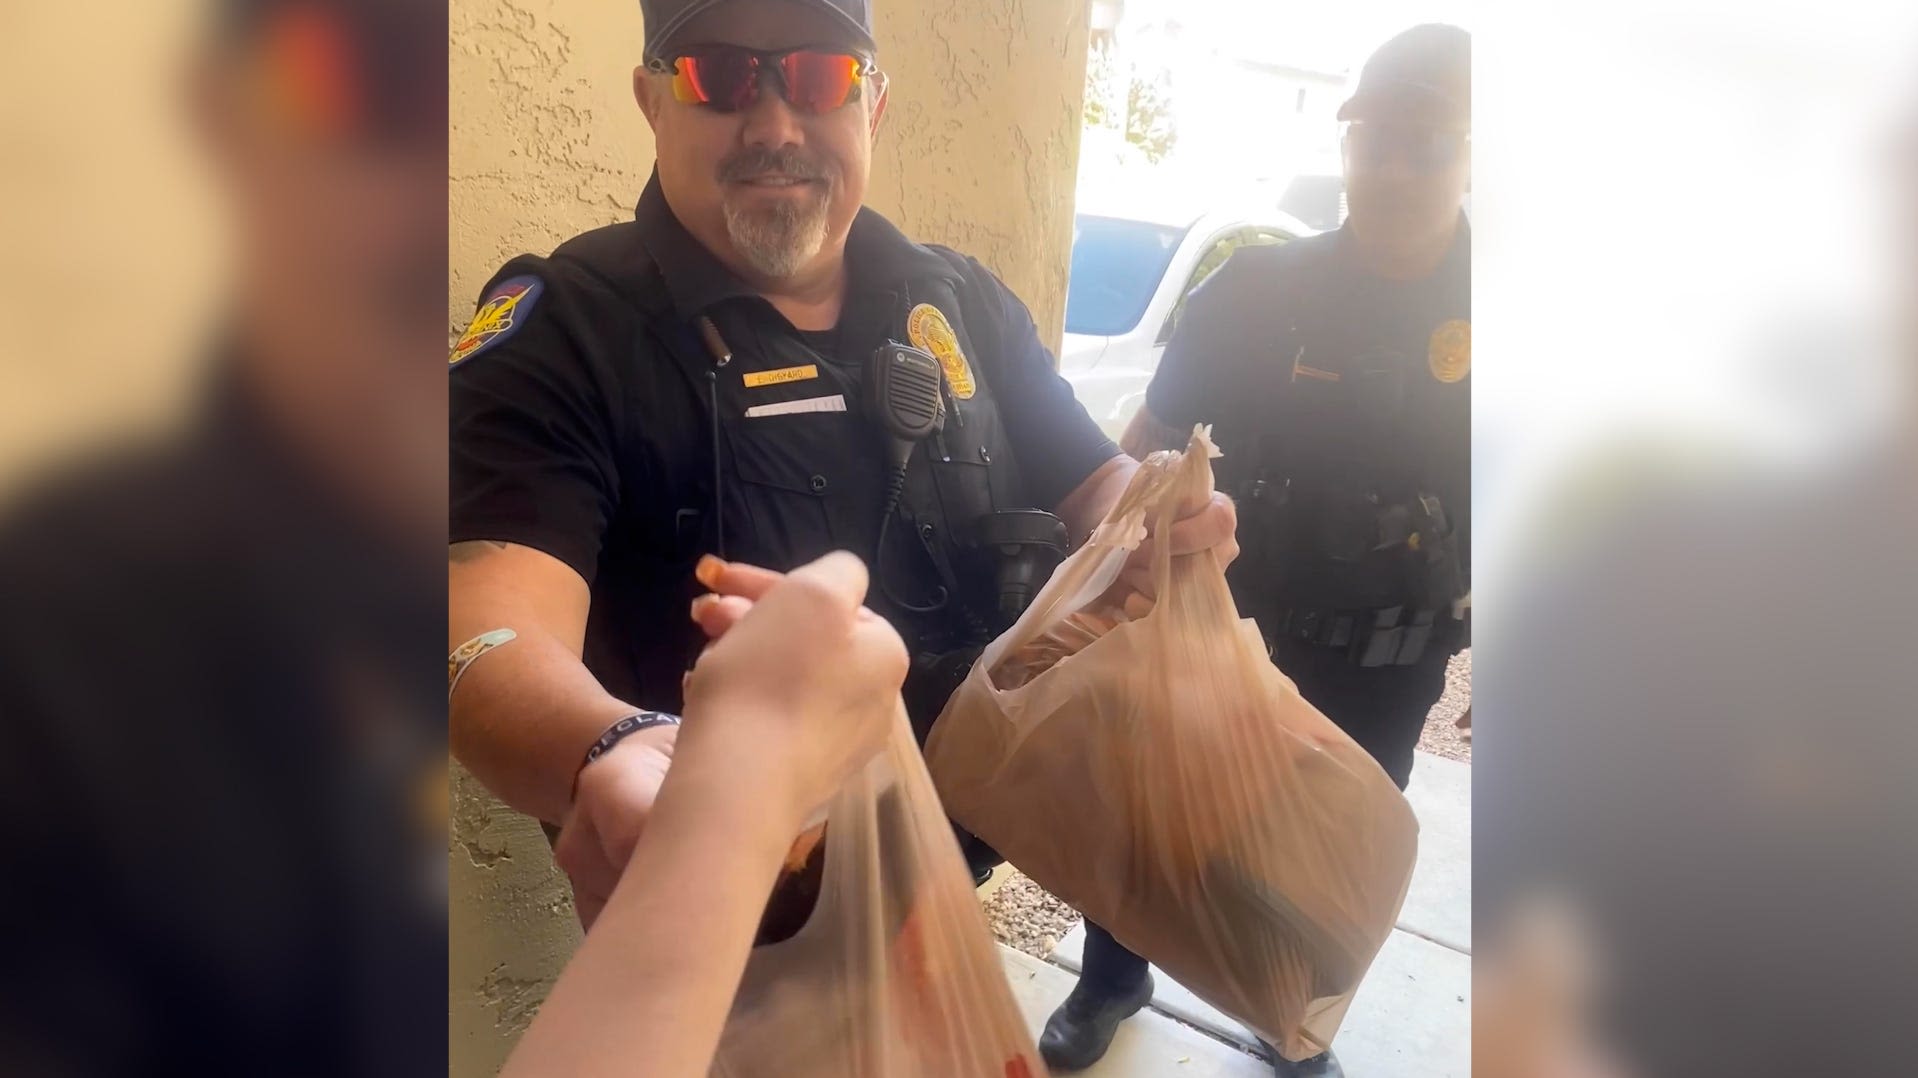 Their DoorDash driver was arrested. Then Phoenix police showed up. See what happened next